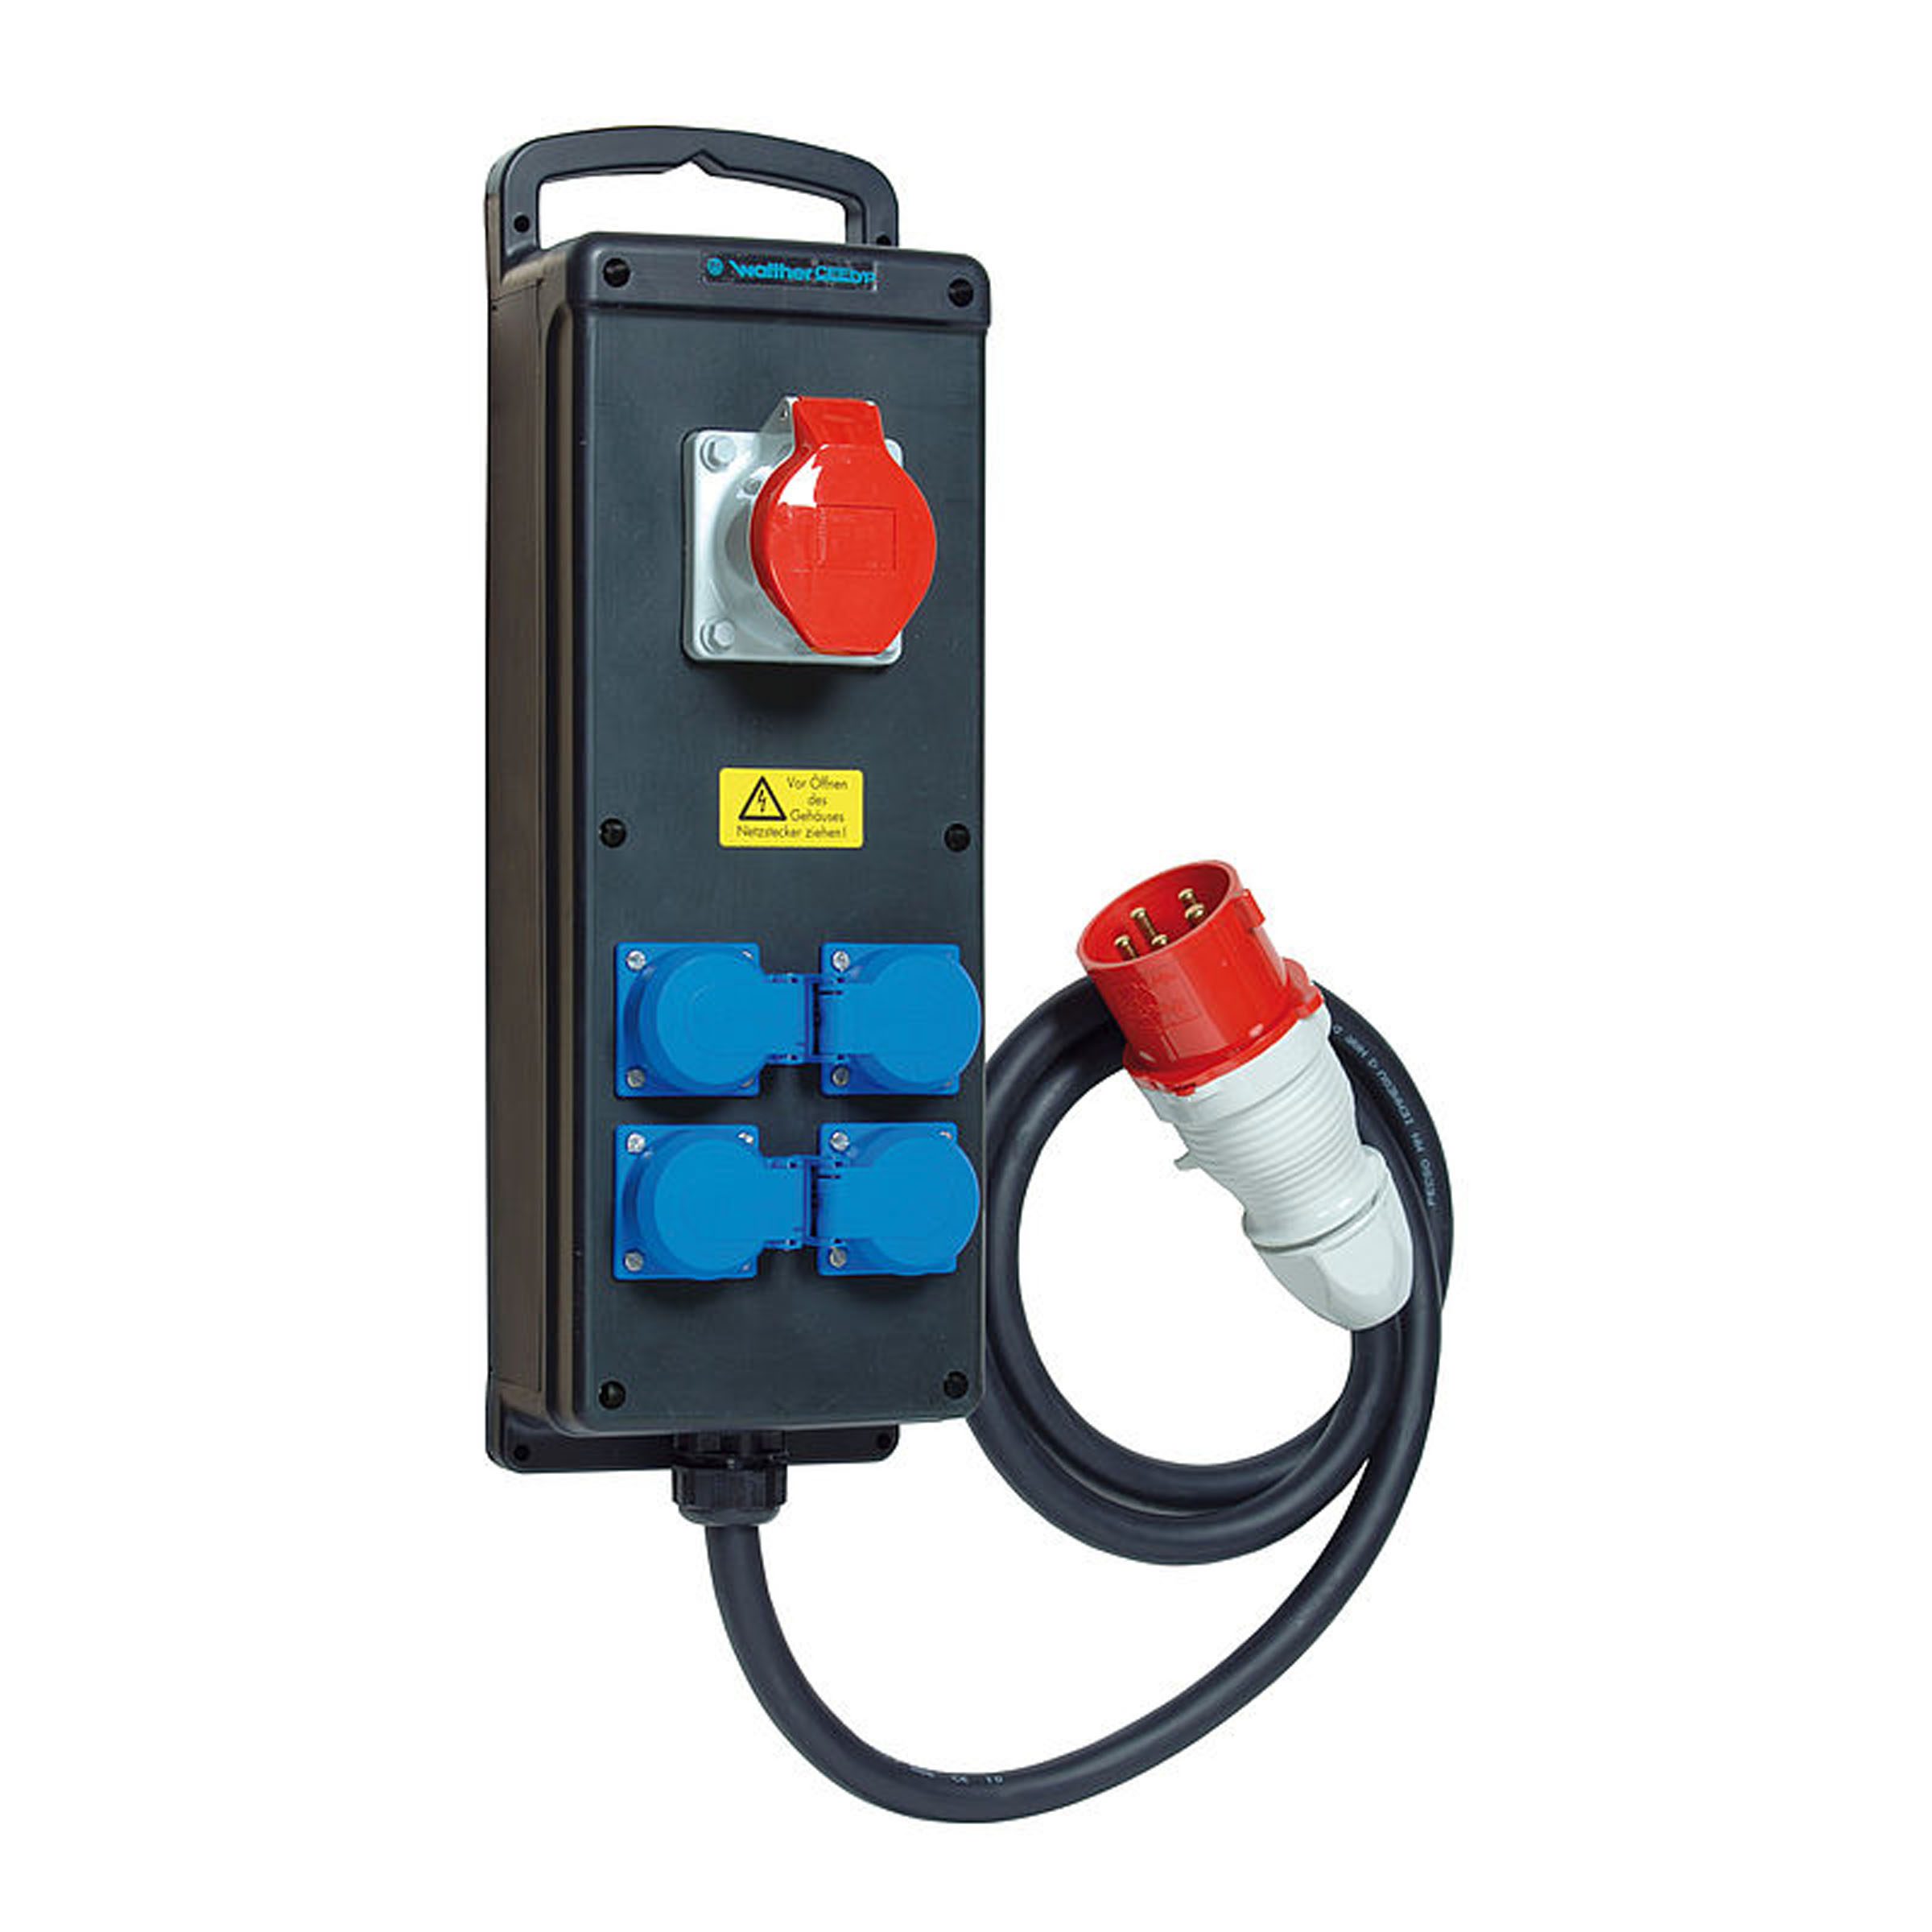 A photo of a solid rubber portable unit with an electrical outlet and power cord, suitable for various applications.